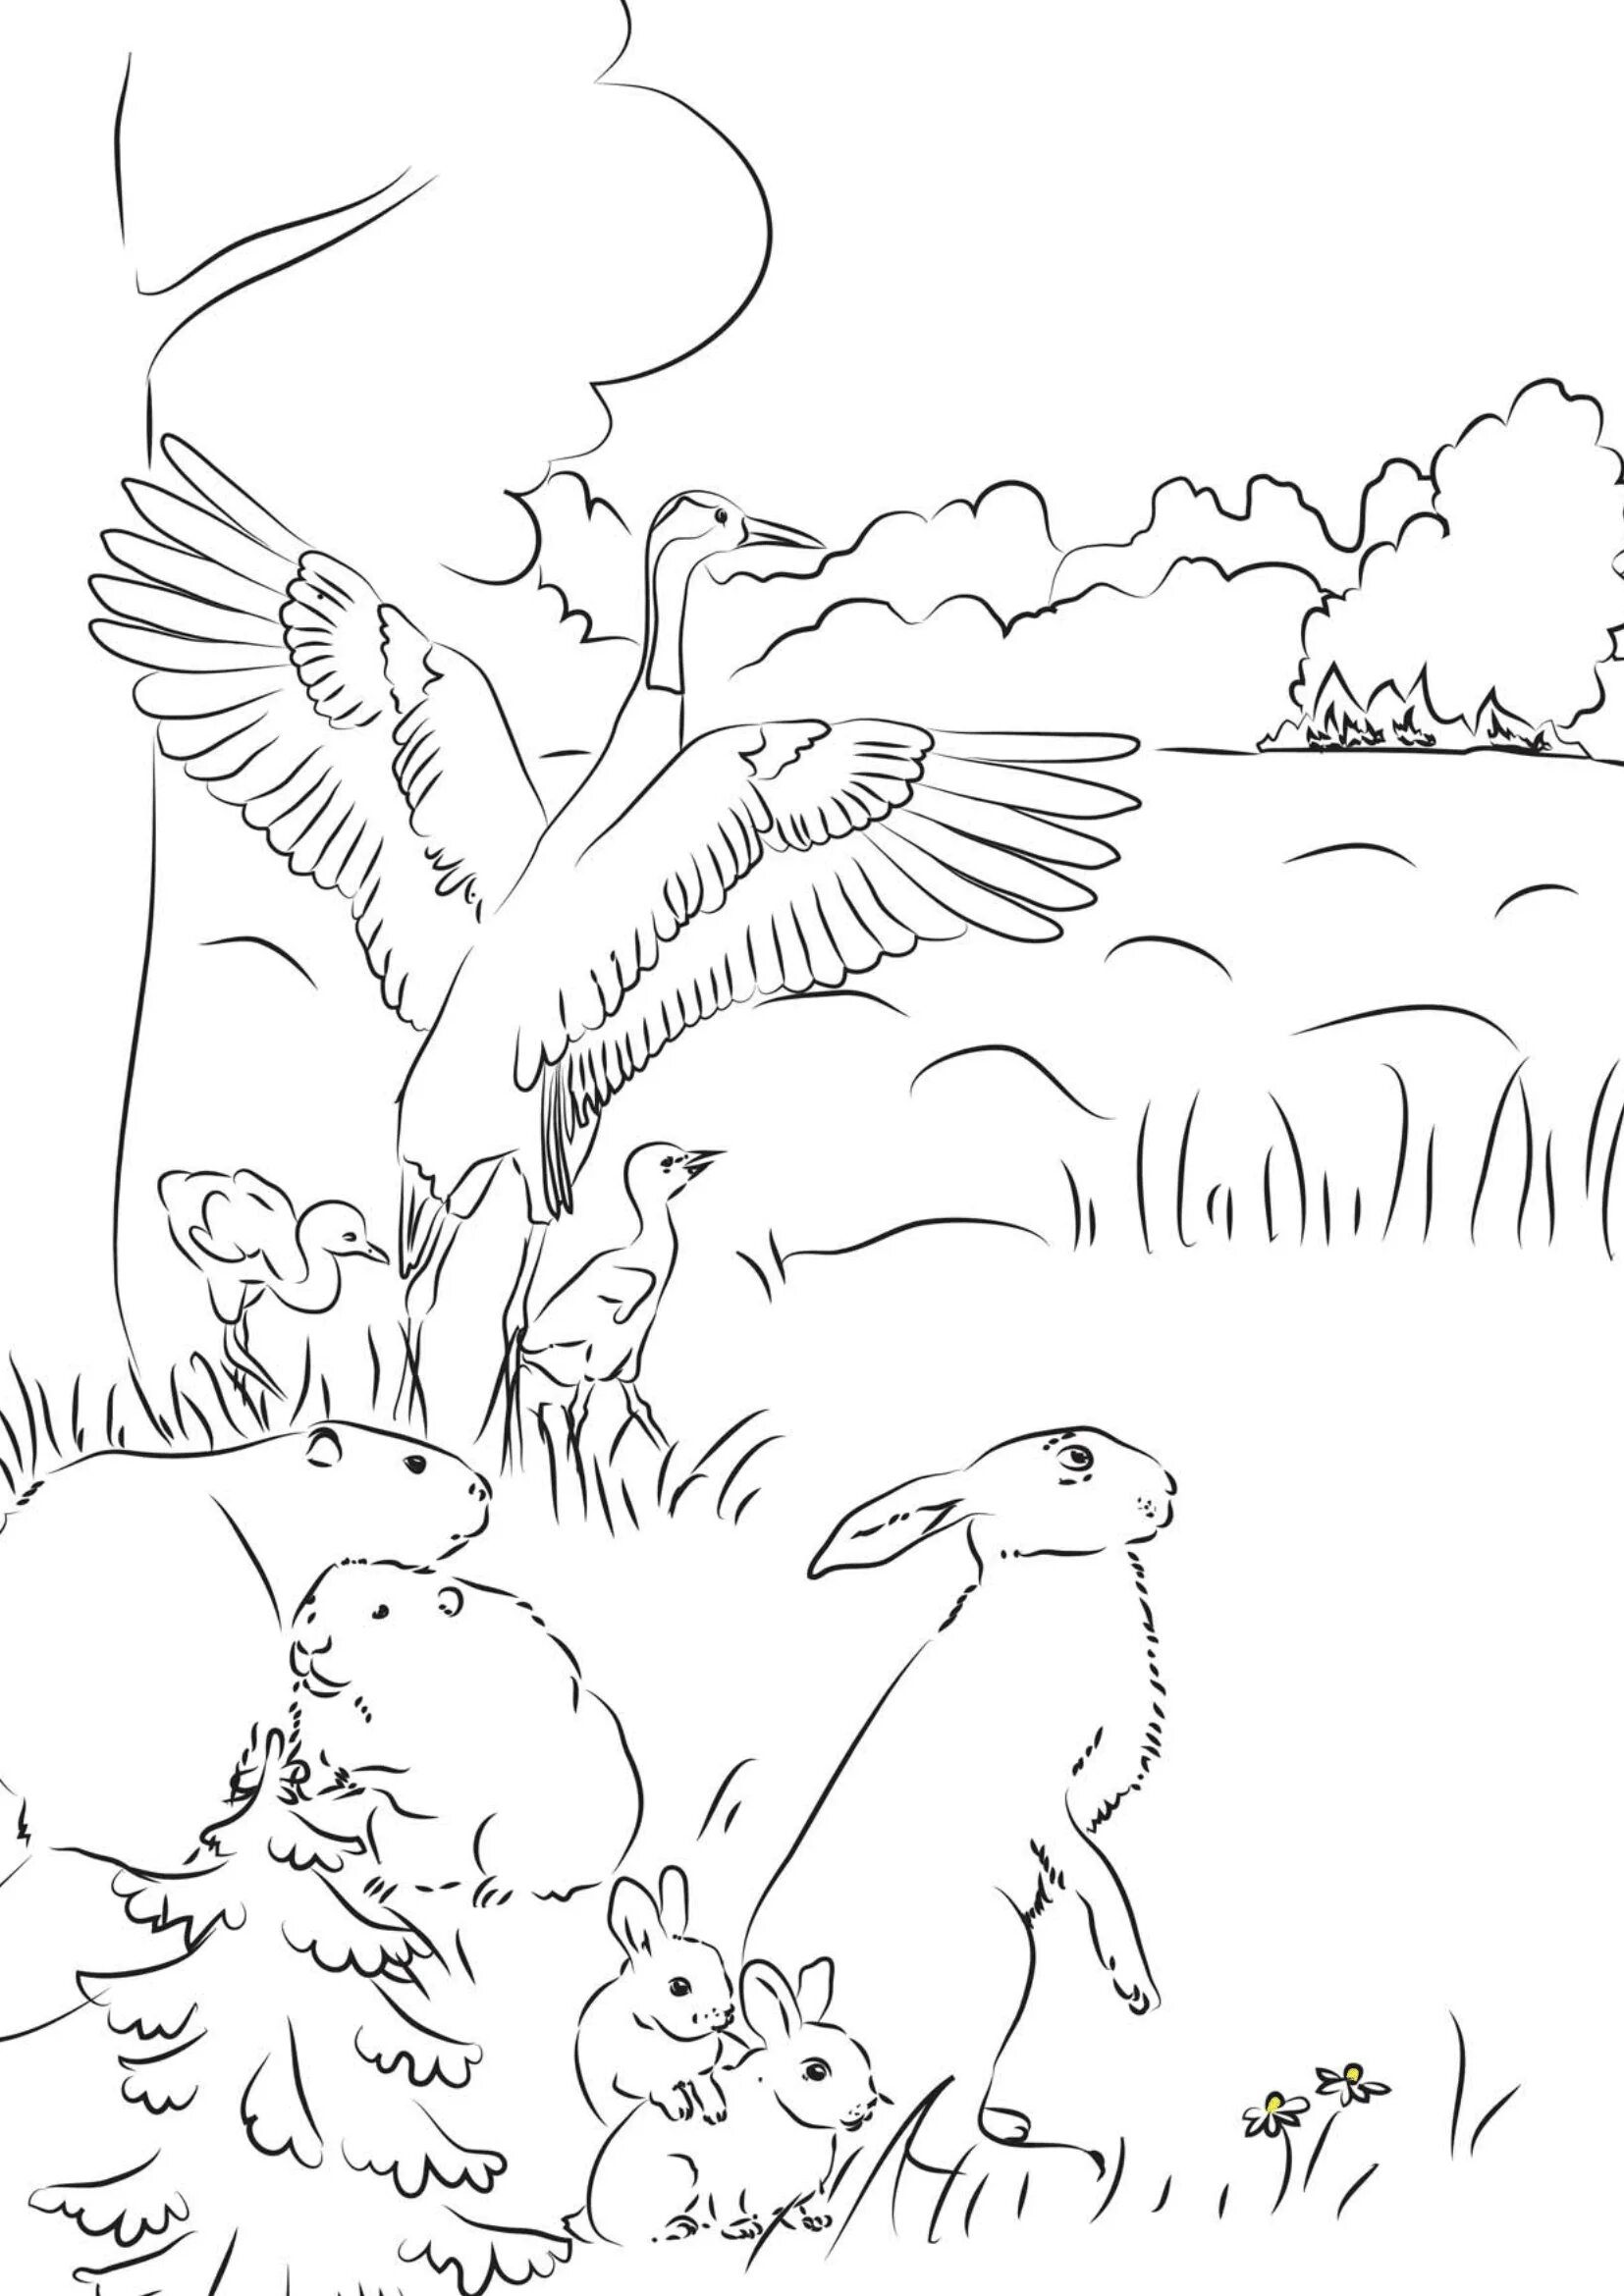 Forest fire coloring page